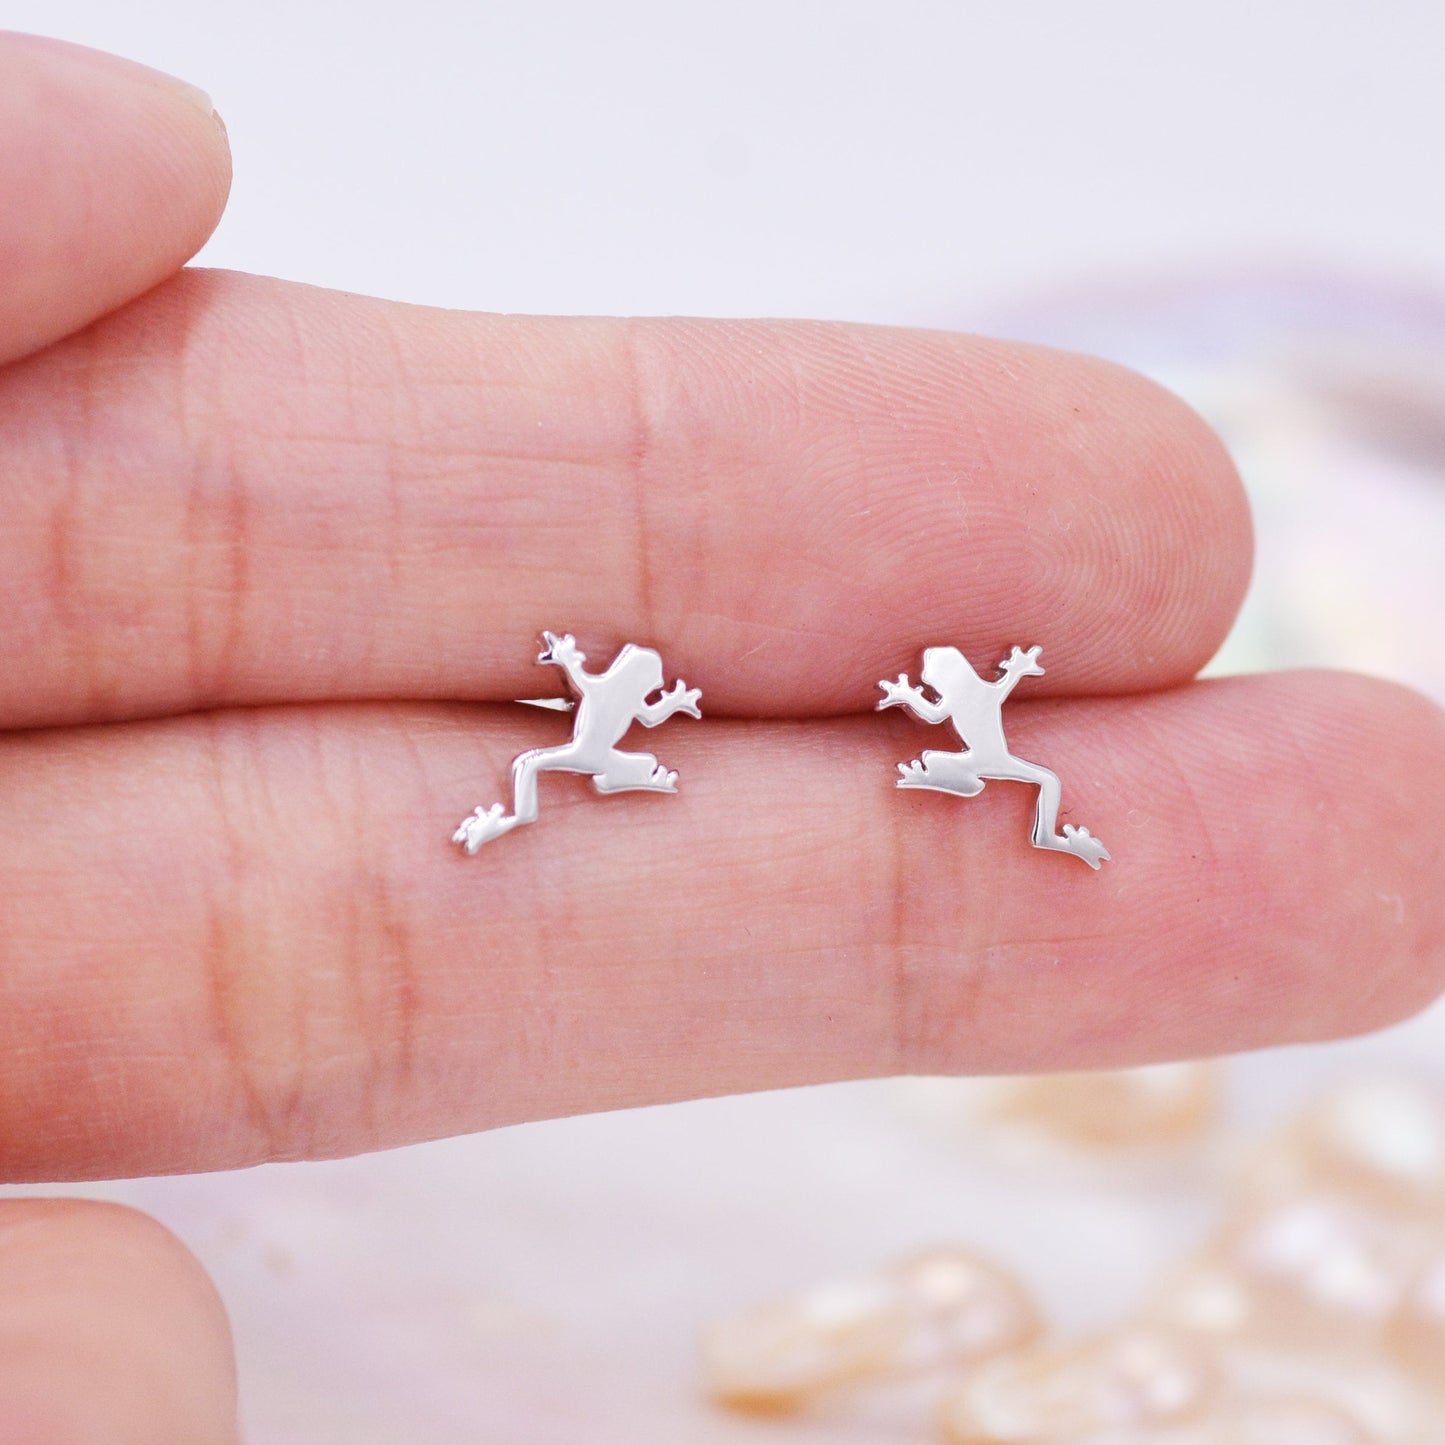 Frog Stud Earrings in Sterling Silver, Tree Frog, Rain Forest Frog Nature Inspired, Cute Fun and Quirky